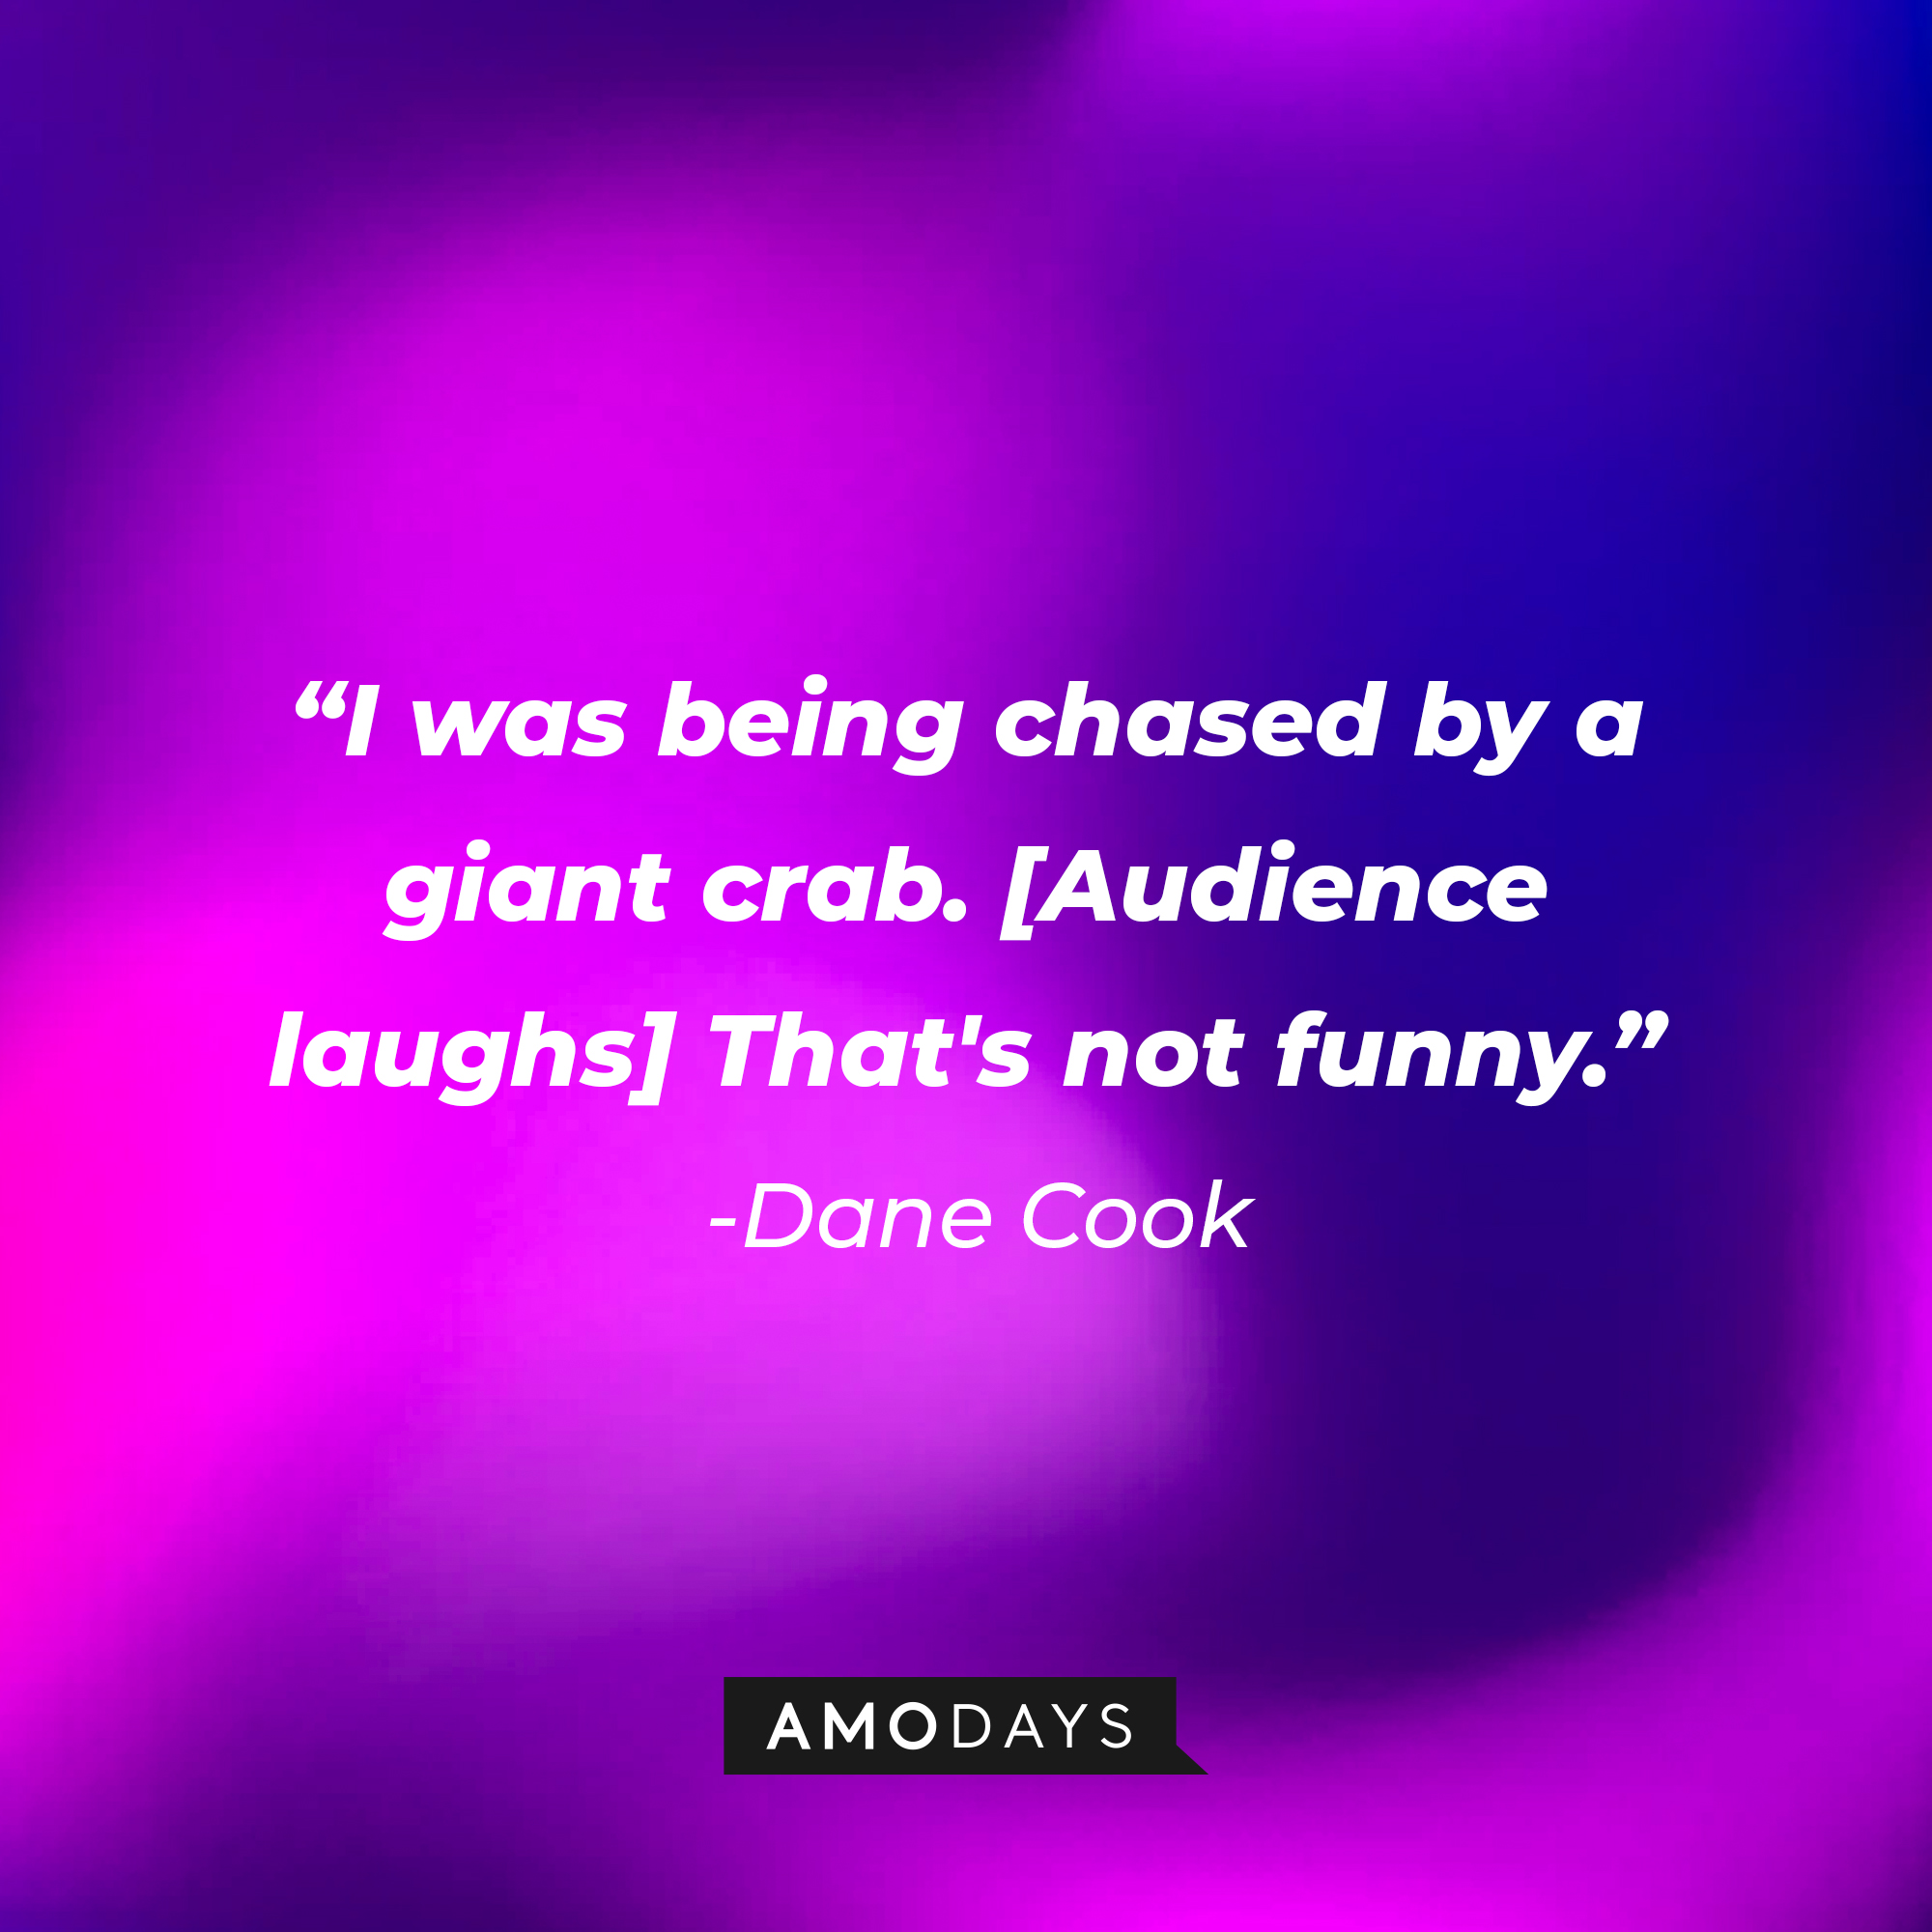 Dane Cook's quote: "I was being chased by a giant crab. [Audience laughs] That's not funny. | Source: Amodays